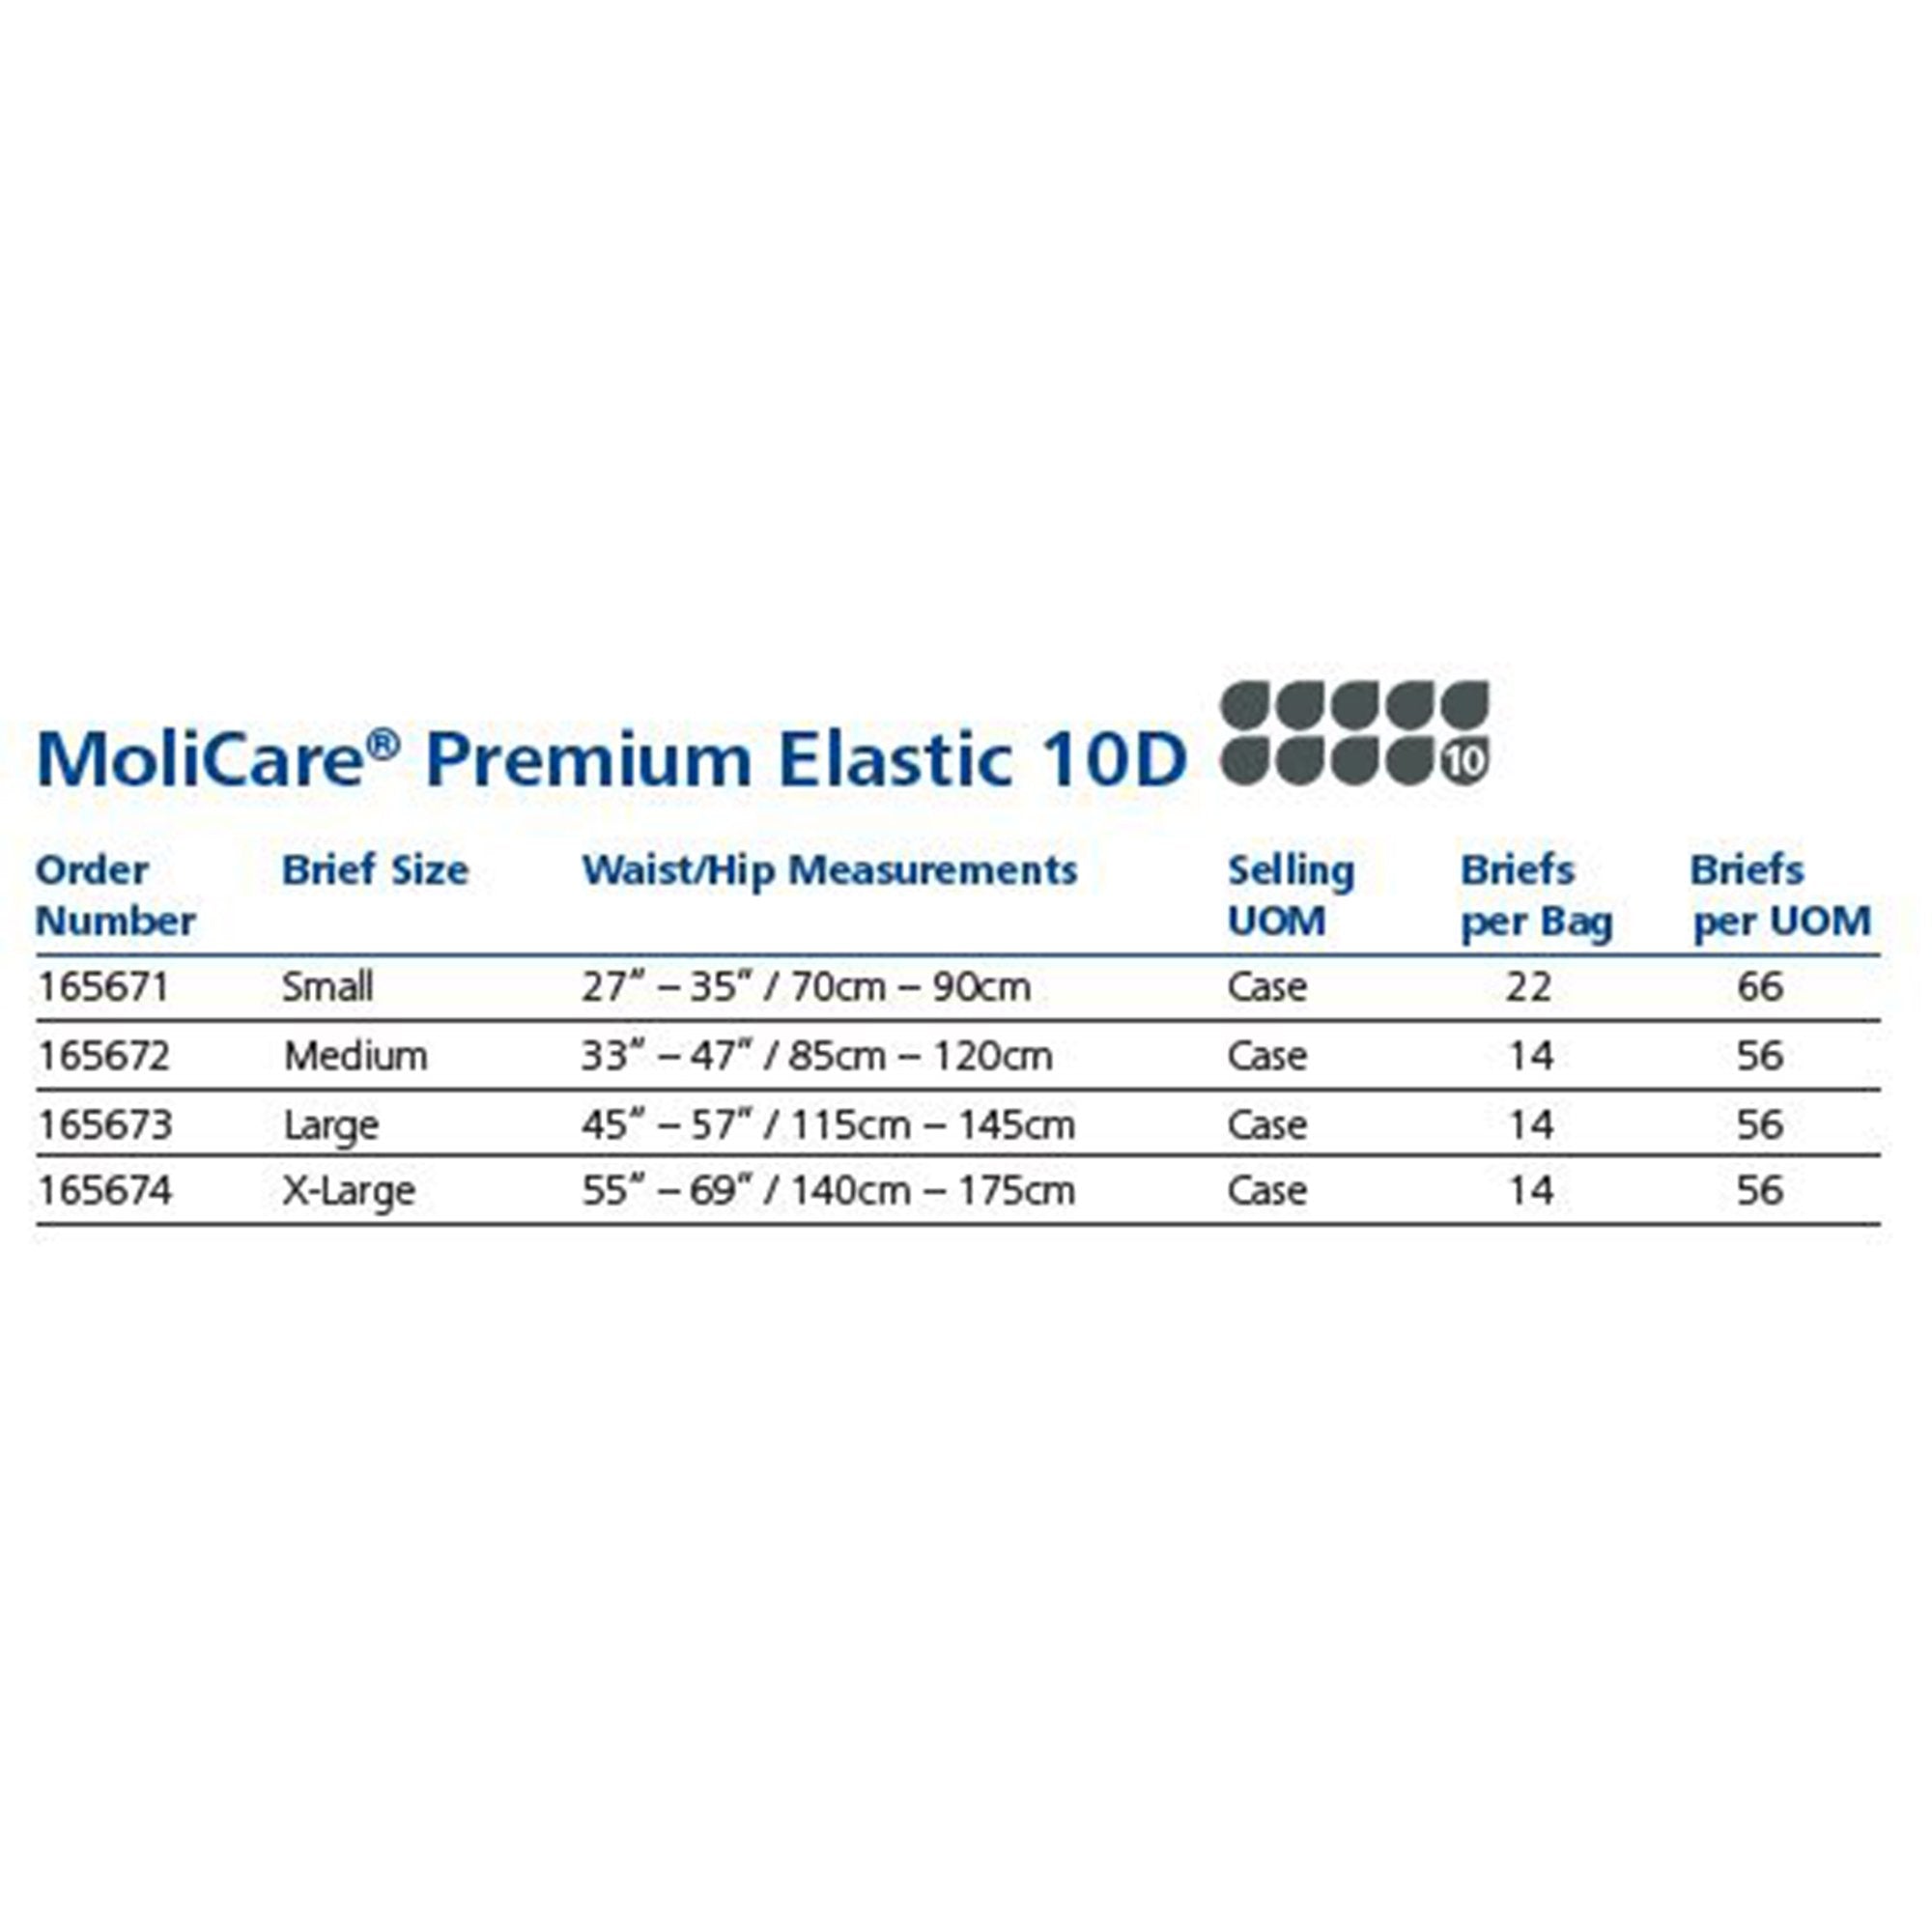 Unisex Adult Incontinence Brief MoliCare® Premium Elastic 10D Small Disposable Heavy Absorbency